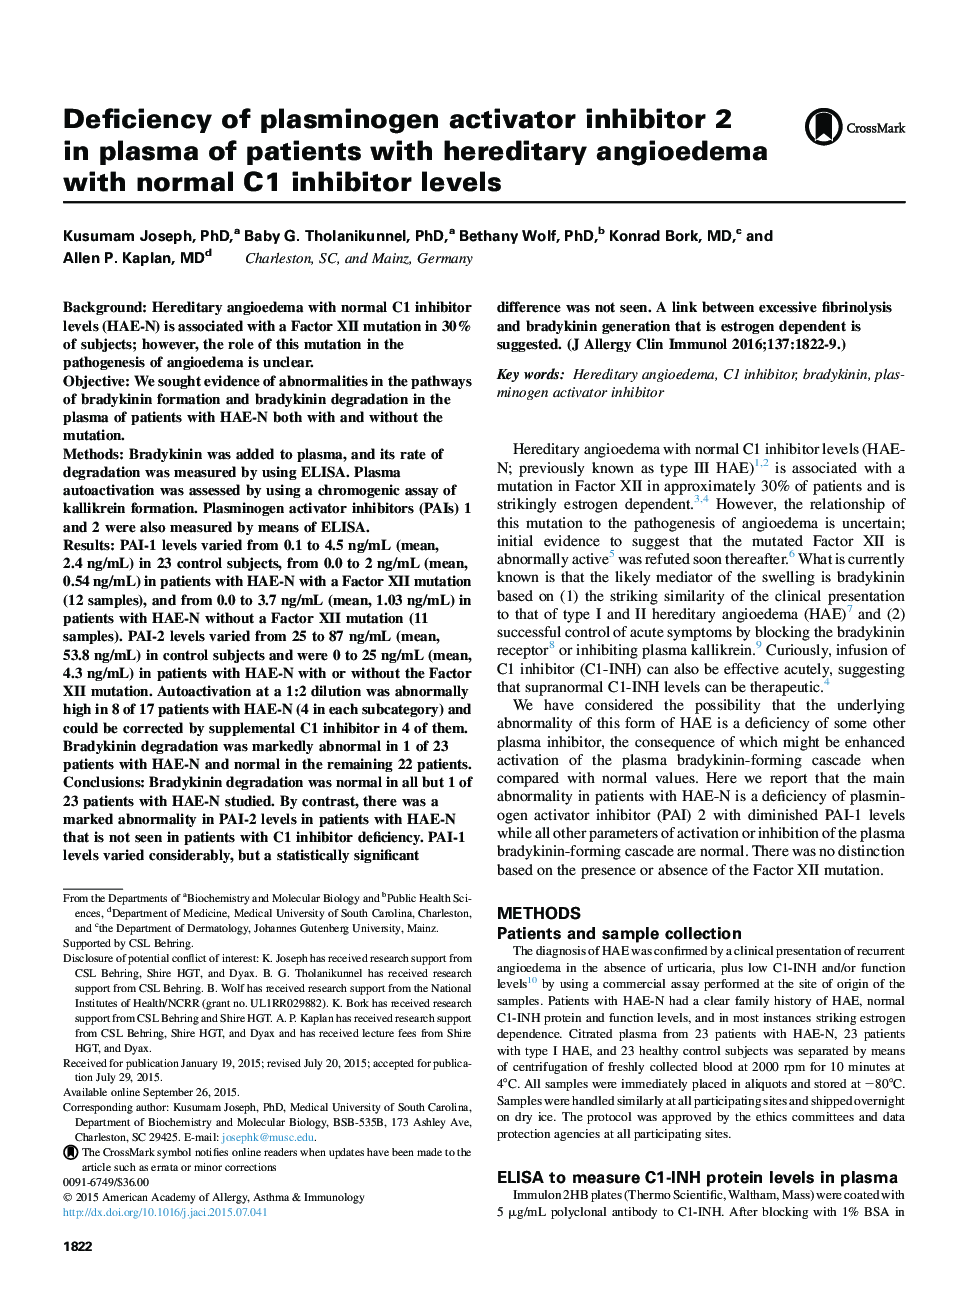 Mechanisms of allergy and clinical immunologyDeficiency of plasminogen activator inhibitor 2 in plasma of patients with hereditary angioedema with normal C1 inhibitor levels